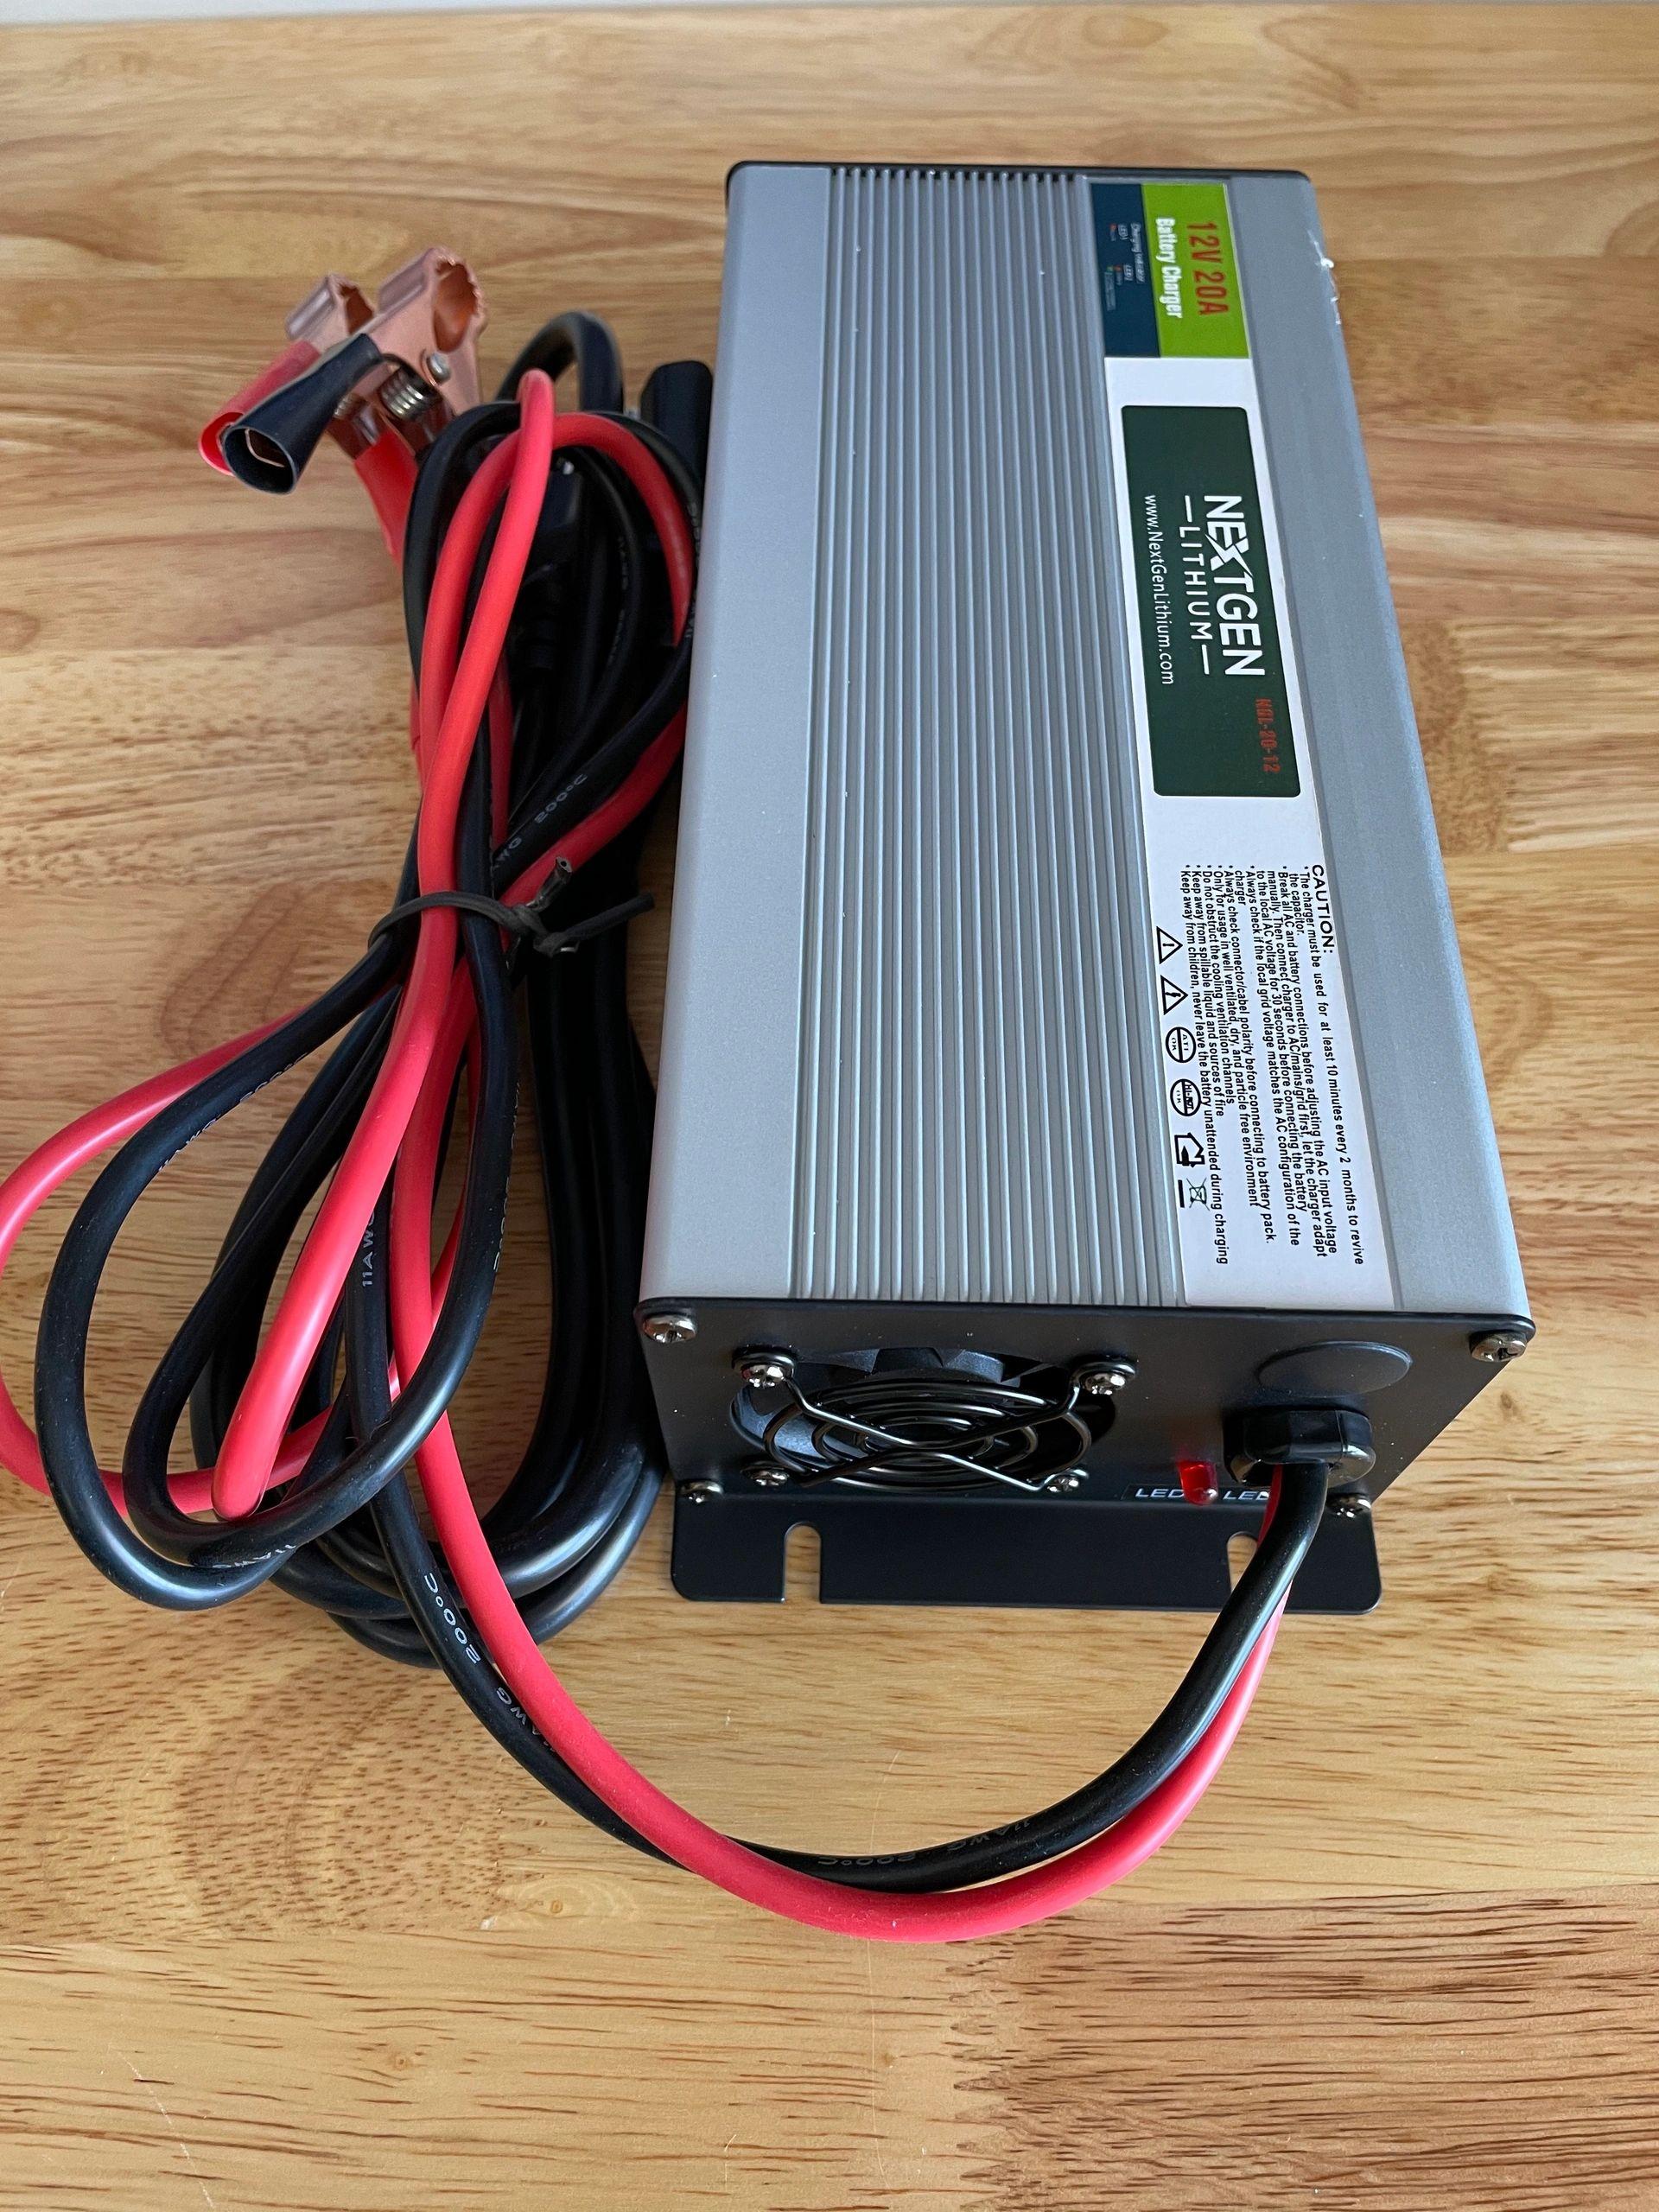 Next Gen Lithium Life PO4 12V 20A Lithium Battery Charger